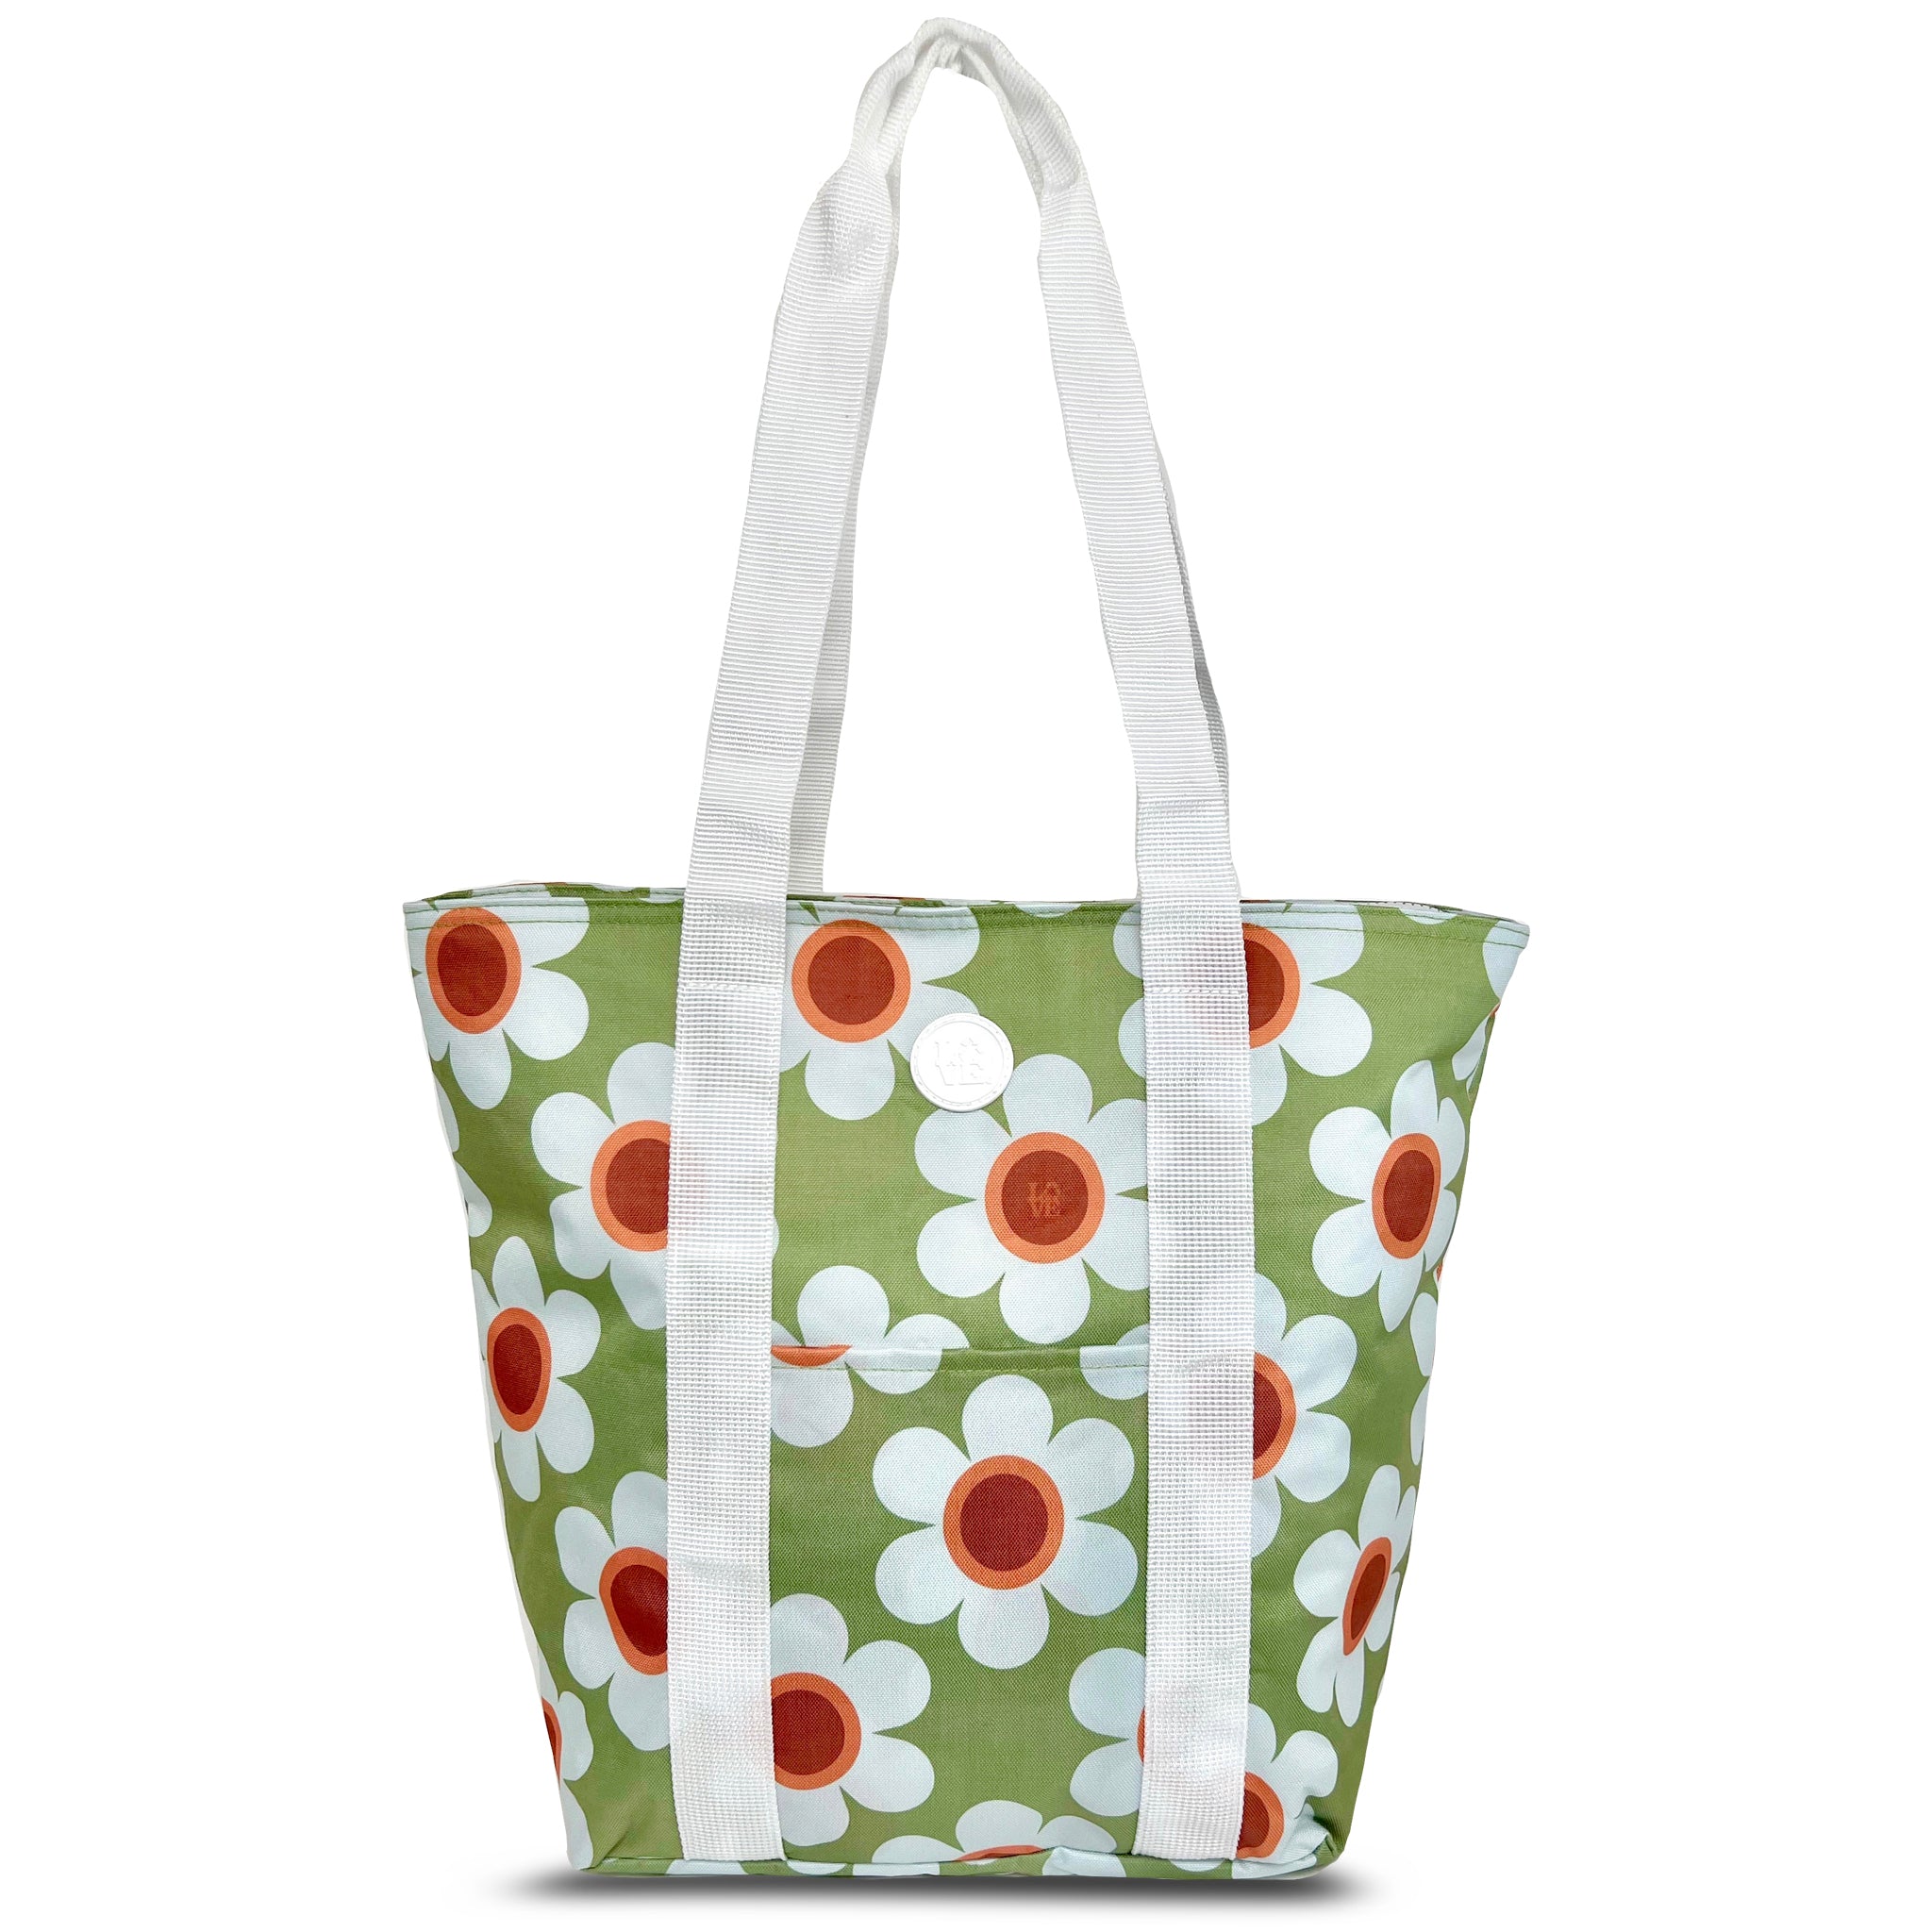 Foremost Reusable Bag Large Insulated Waves Pattern Multi-Purpose Tote